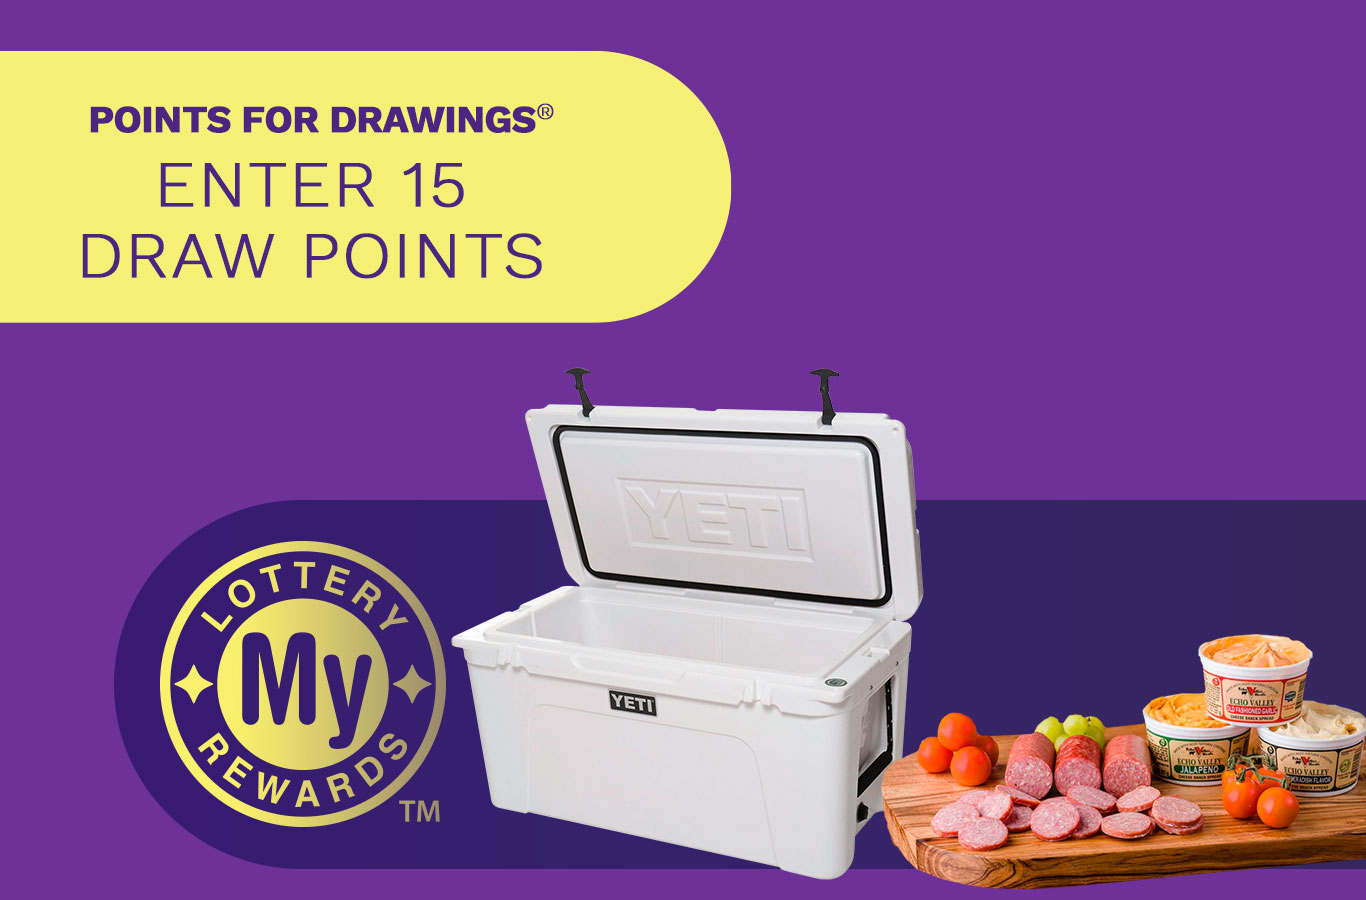 Here's your chance to win a YETI® Cooler Bundle! Enter by Monday, October 31st.